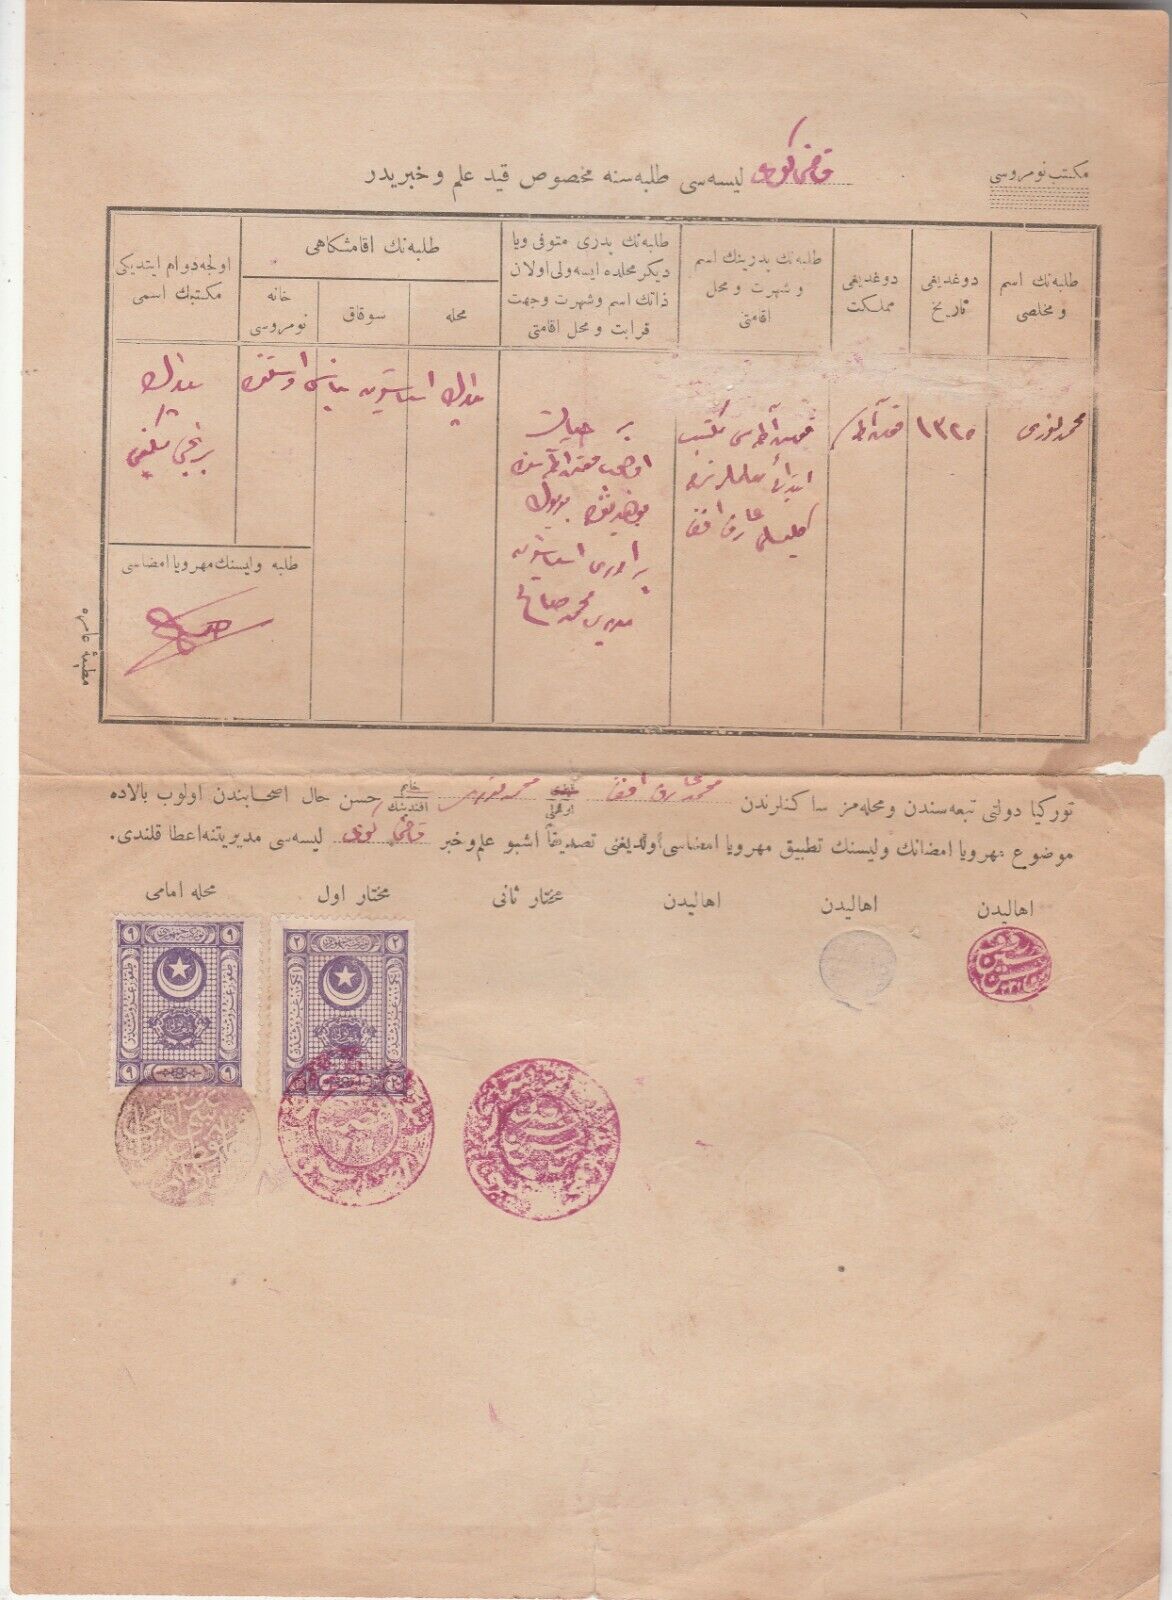 EDUCATION - TURKEY OTTOMAN PERIOD SCHOOL REGISTRATION CERTIFICATE WITH STAMPS